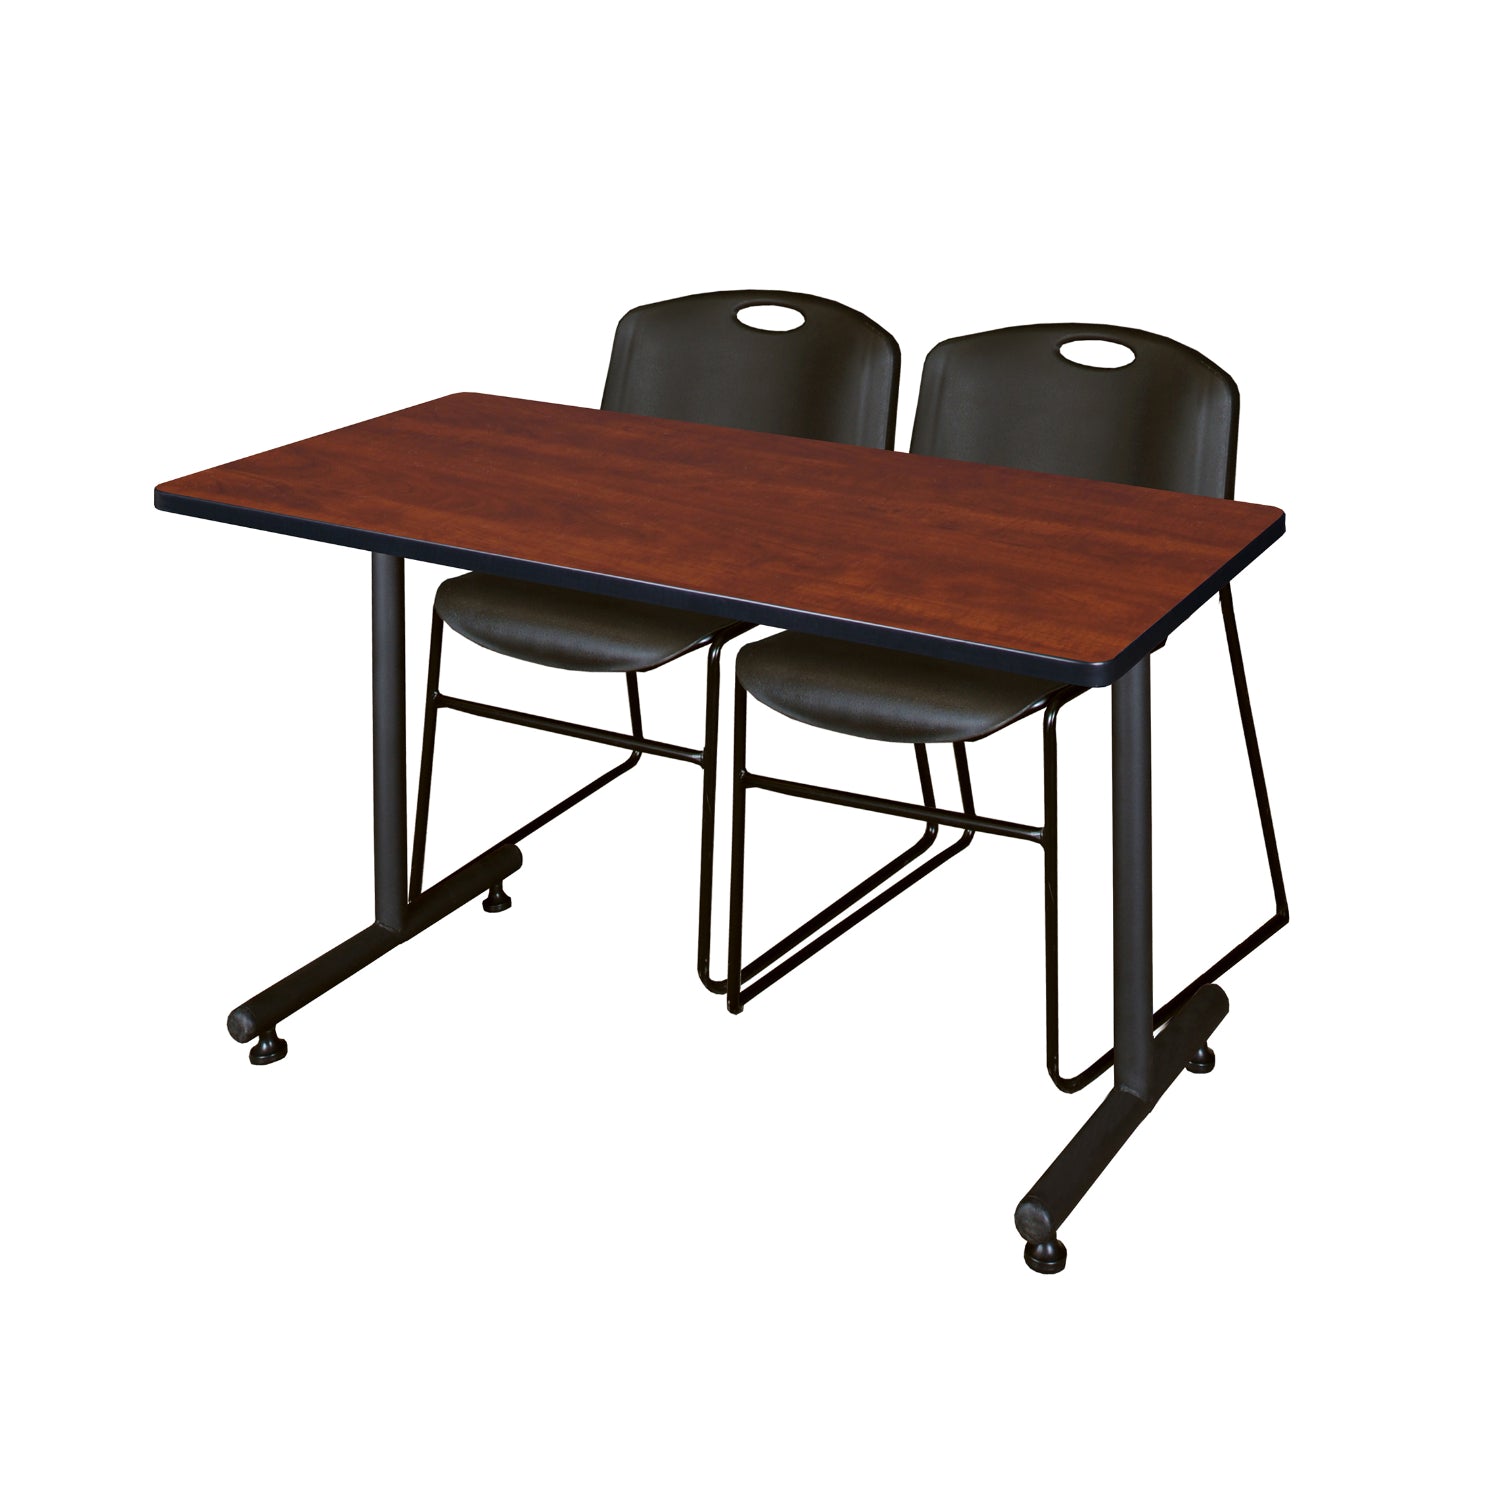 Kobe Training Table and Chair Package, Kobe 48" x 24" T-Base Training/Seminar Table with 2 Zeng Stack Chairs